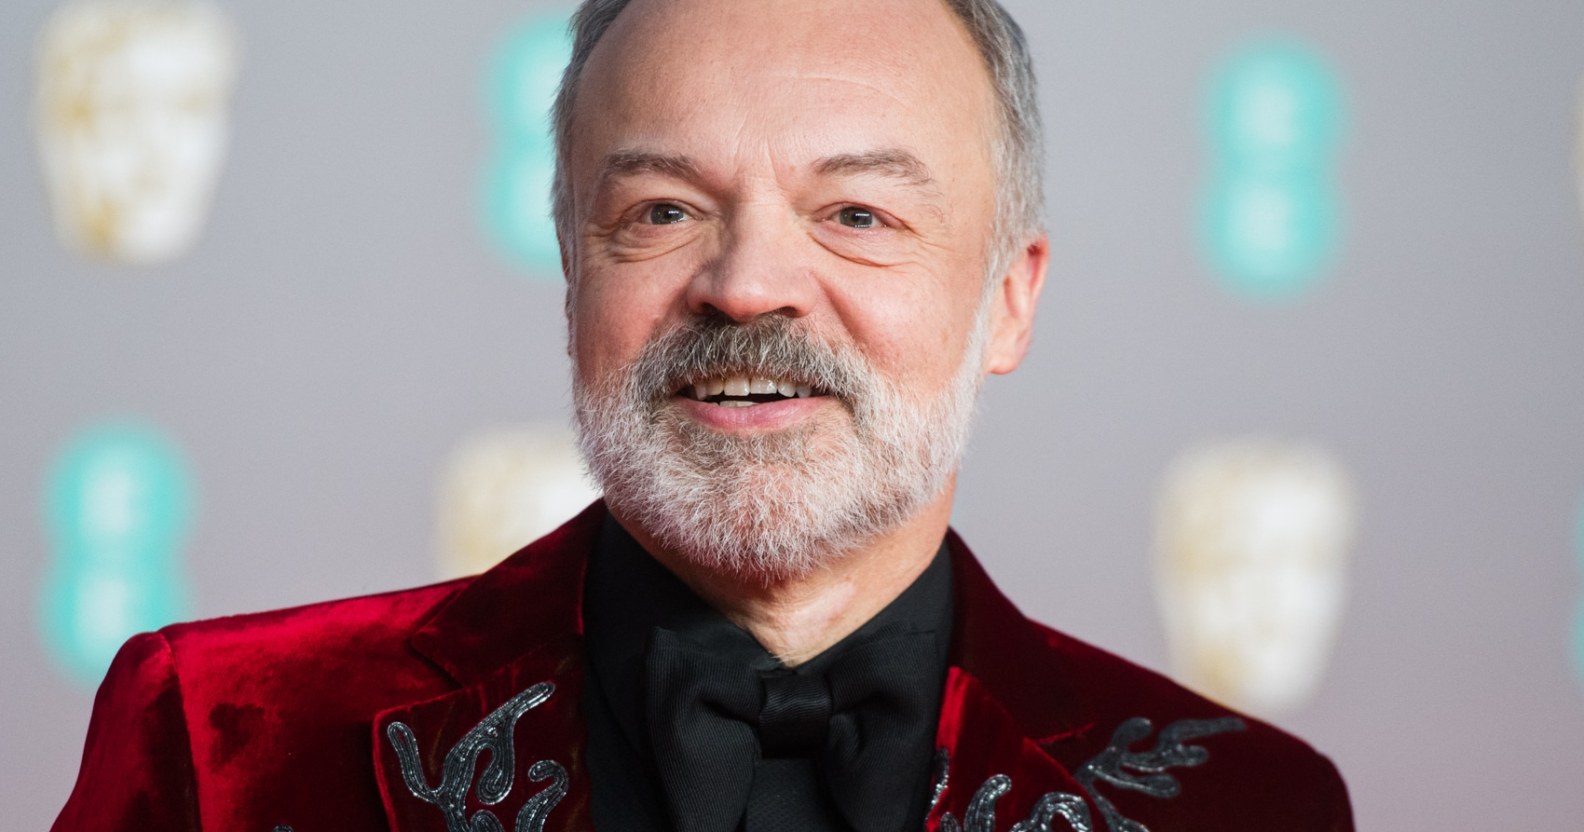 BBC broadcaster Graham Norton is stepping away from his radio show